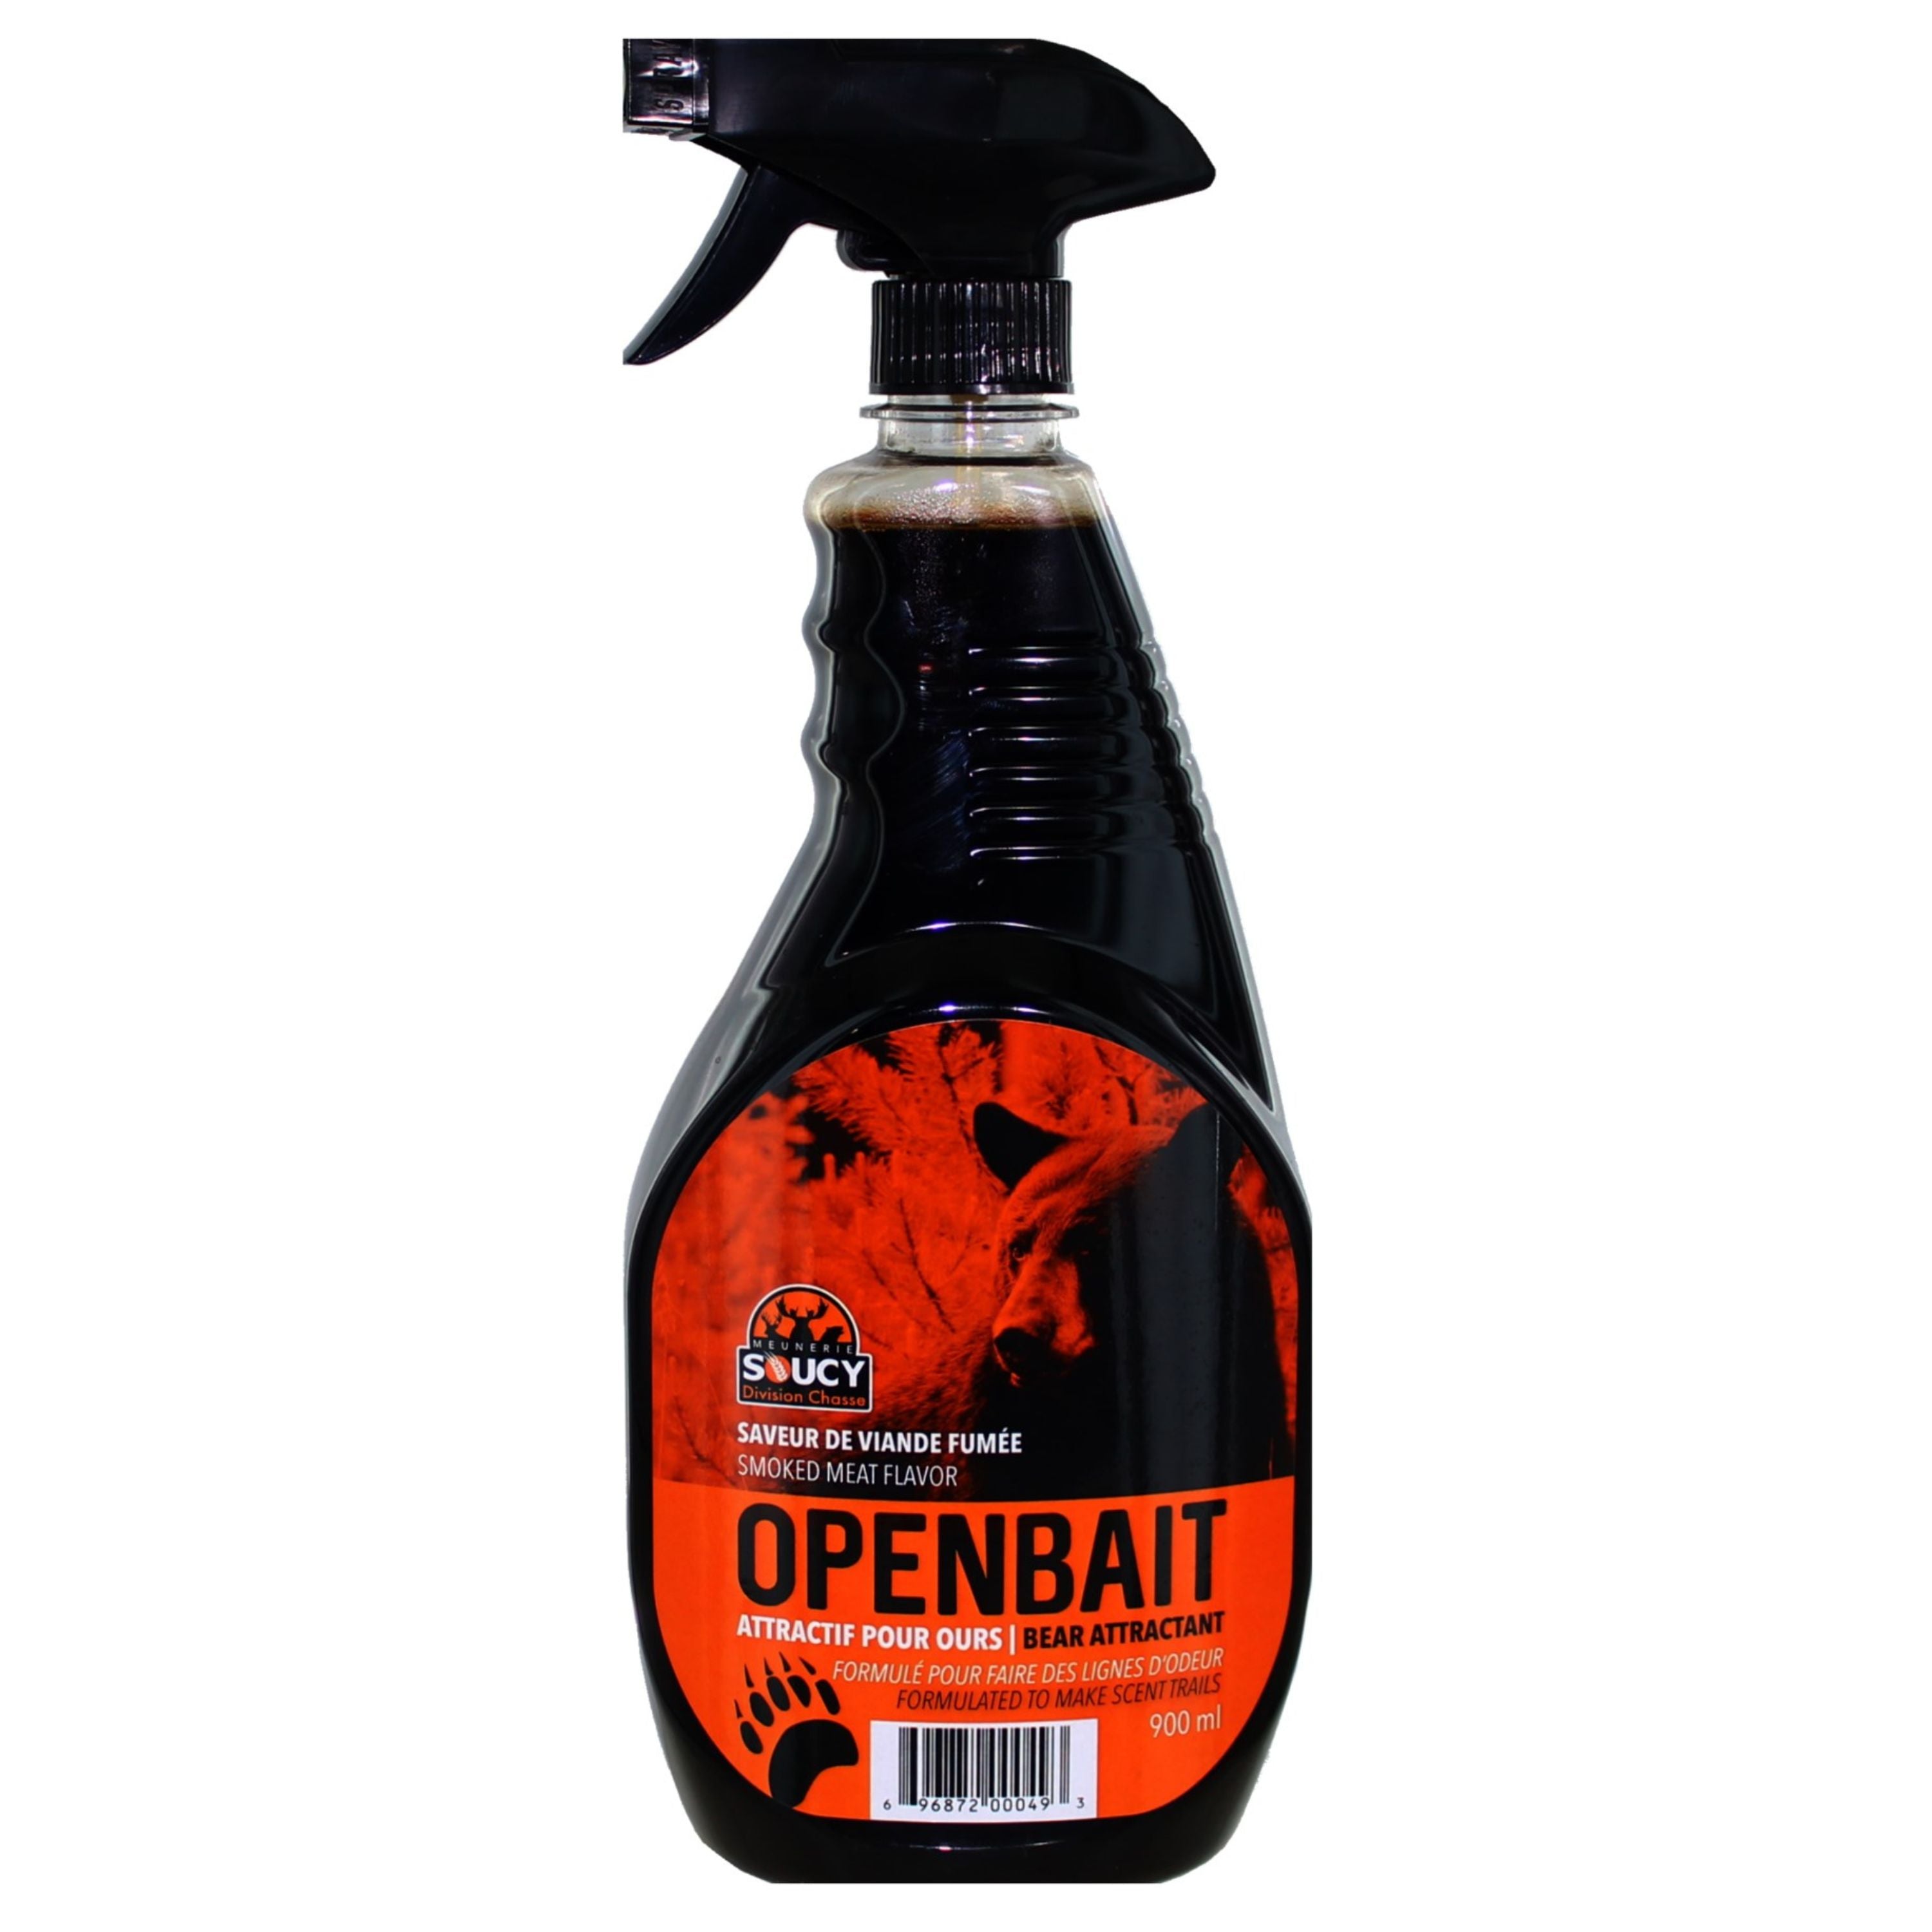 "Open Bait" Smoked meat flavor bear attractant